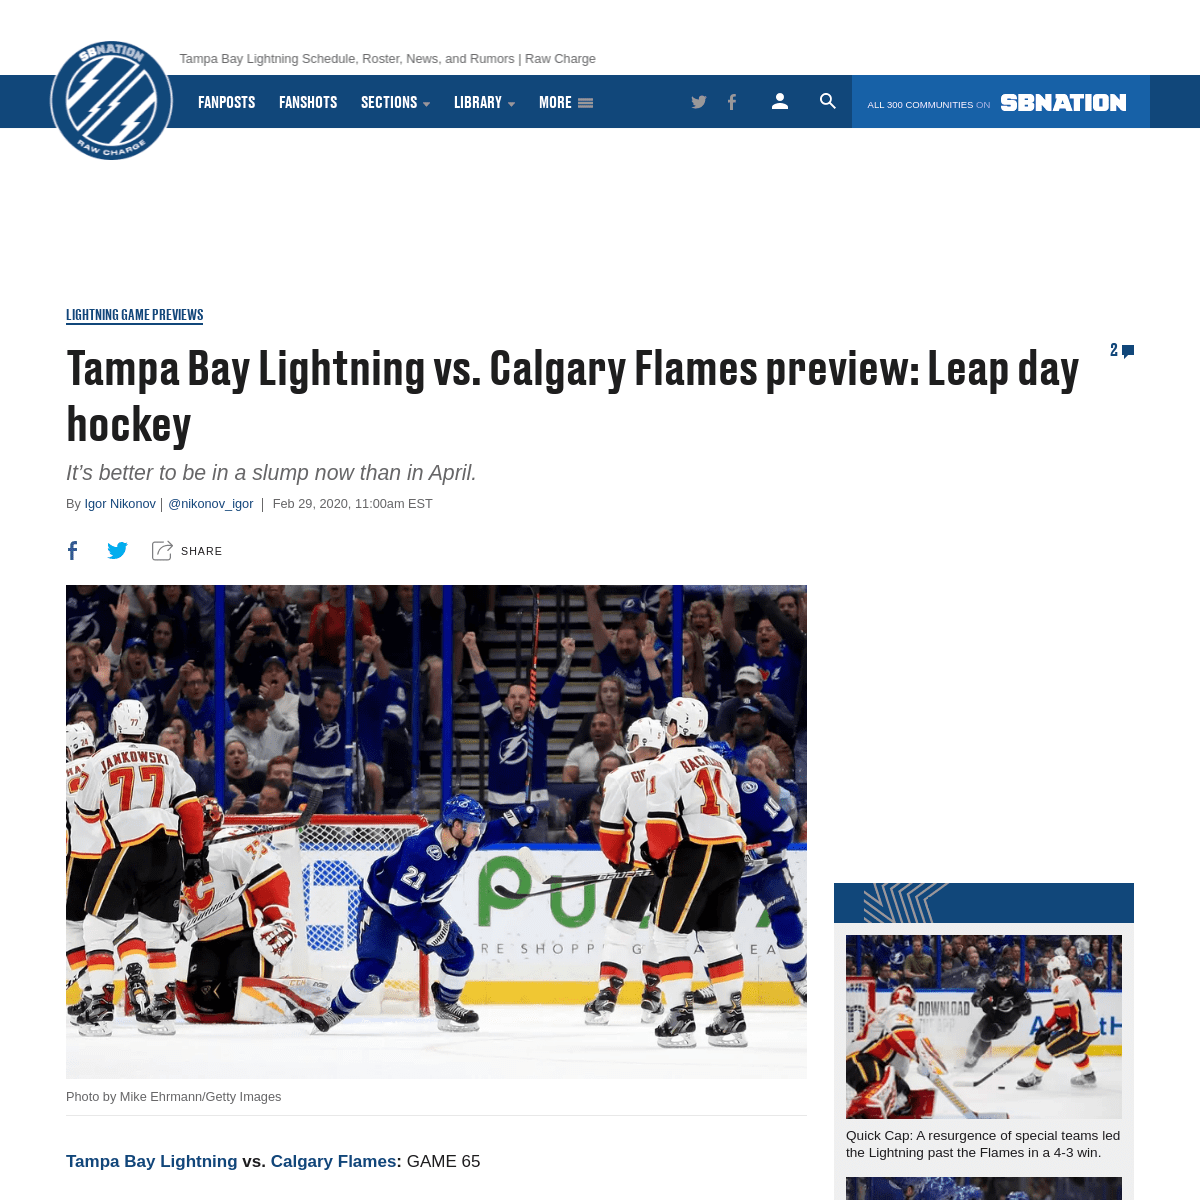 A complete backup of www.rawcharge.com/2020/2/29/21158931/tampa-bay-lightning-vs-calgary-flames-preview-lines-how-to-watch-nhl-t